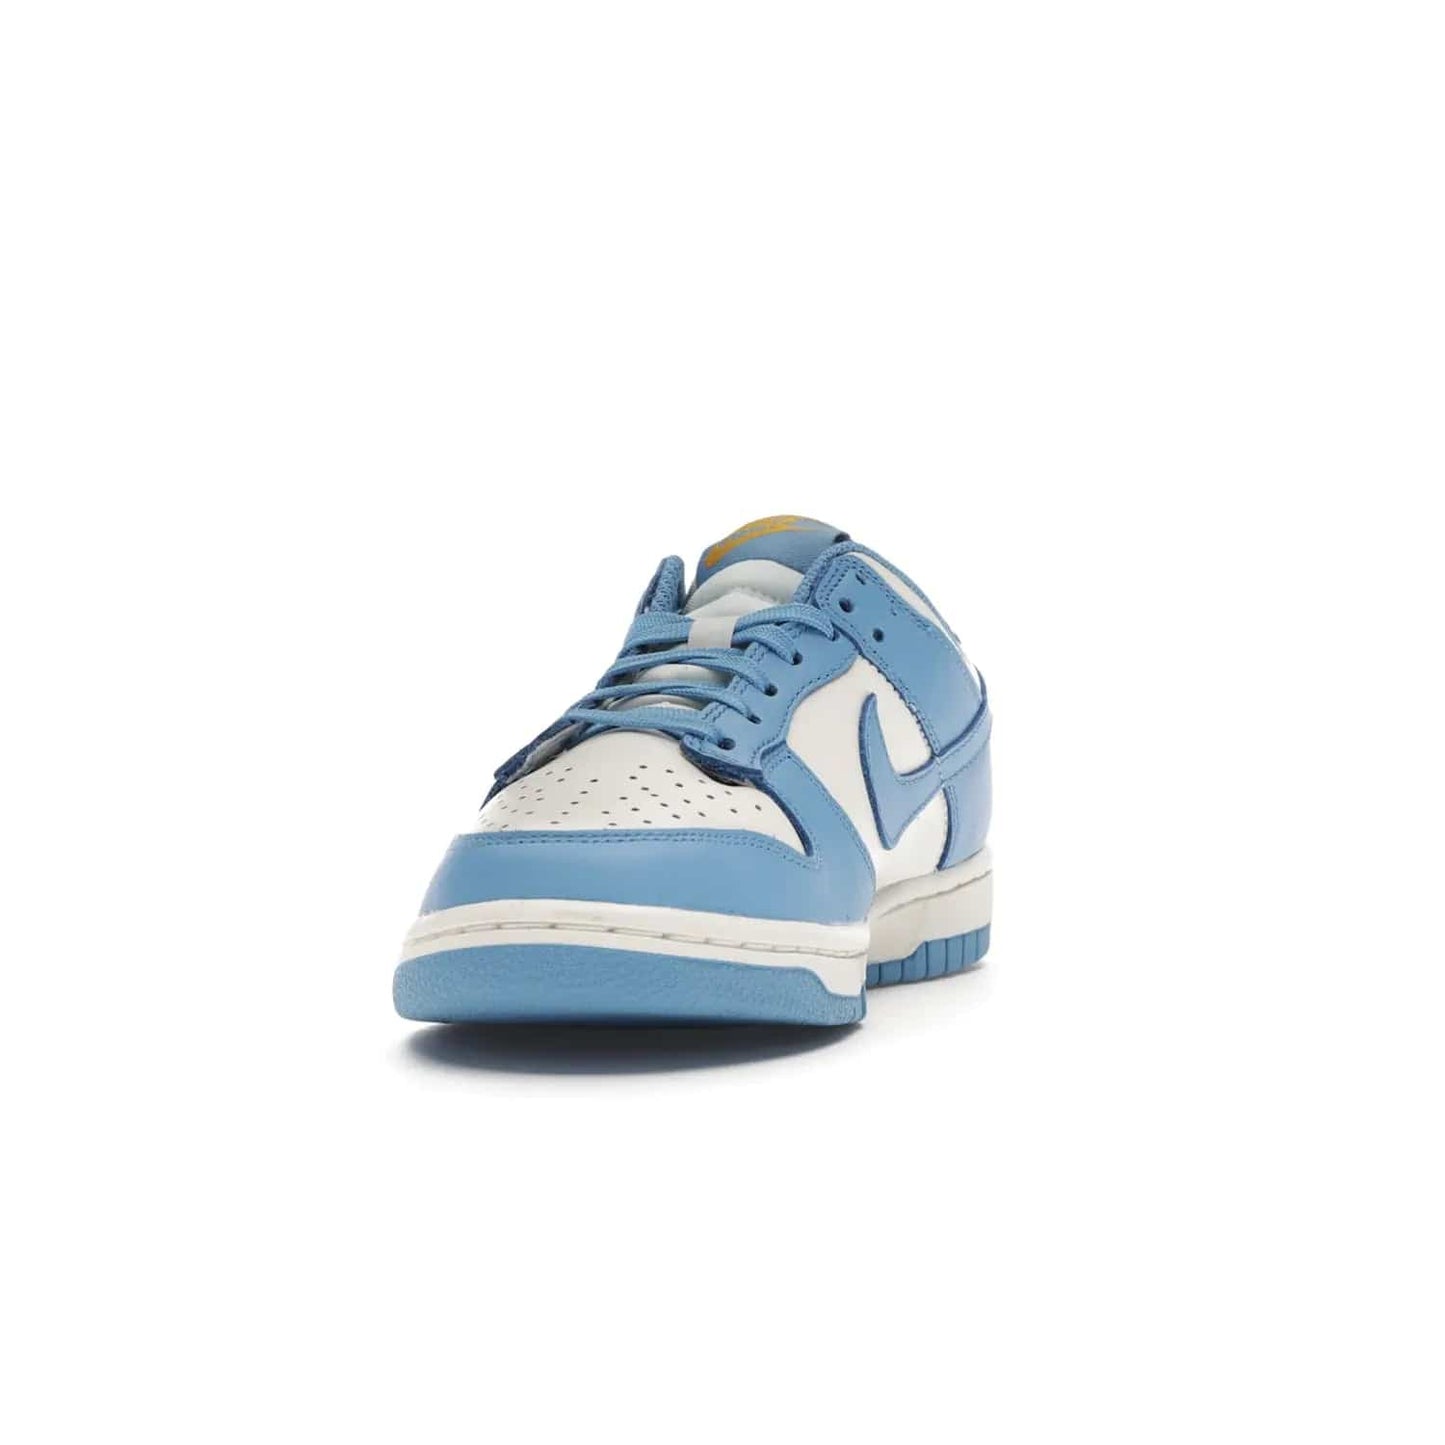 Nike Dunk Low Coast (Women's) - Image 12 - Only at www.BallersClubKickz.com - Iconic UCLA colors honor the west coast with the Nike Dunk Low Coast (Women's), a bold combo of light blue, white and yellow. Light leather upper with white midsole and light EVA outsole offer a modern twist. Released Feb 2021 for $100.